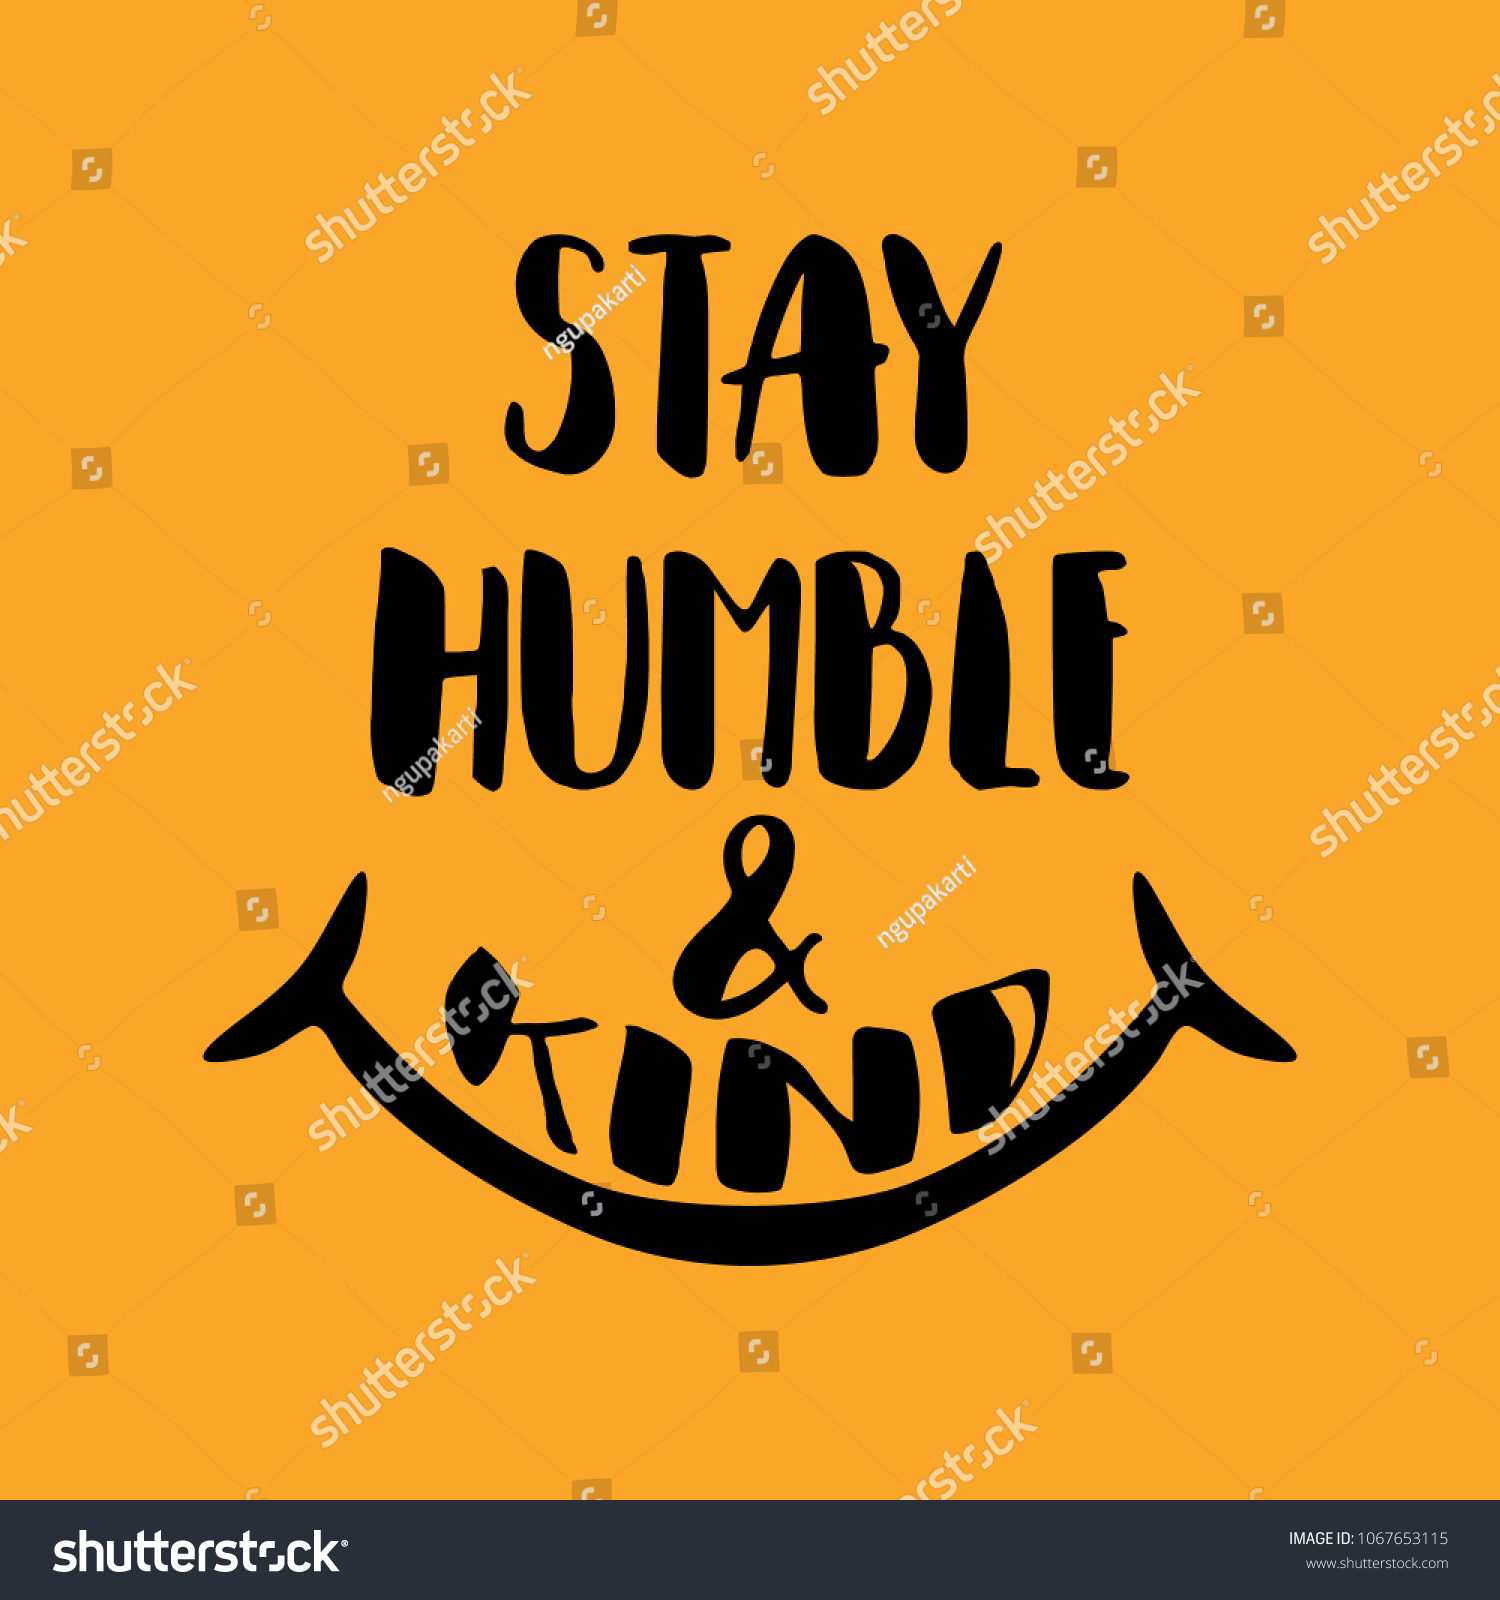 Poster Motivation Quotes Stay Humble Kind Stock Vector Royalty Free 1067653115 - humble roblox id related keywords suggestions humble